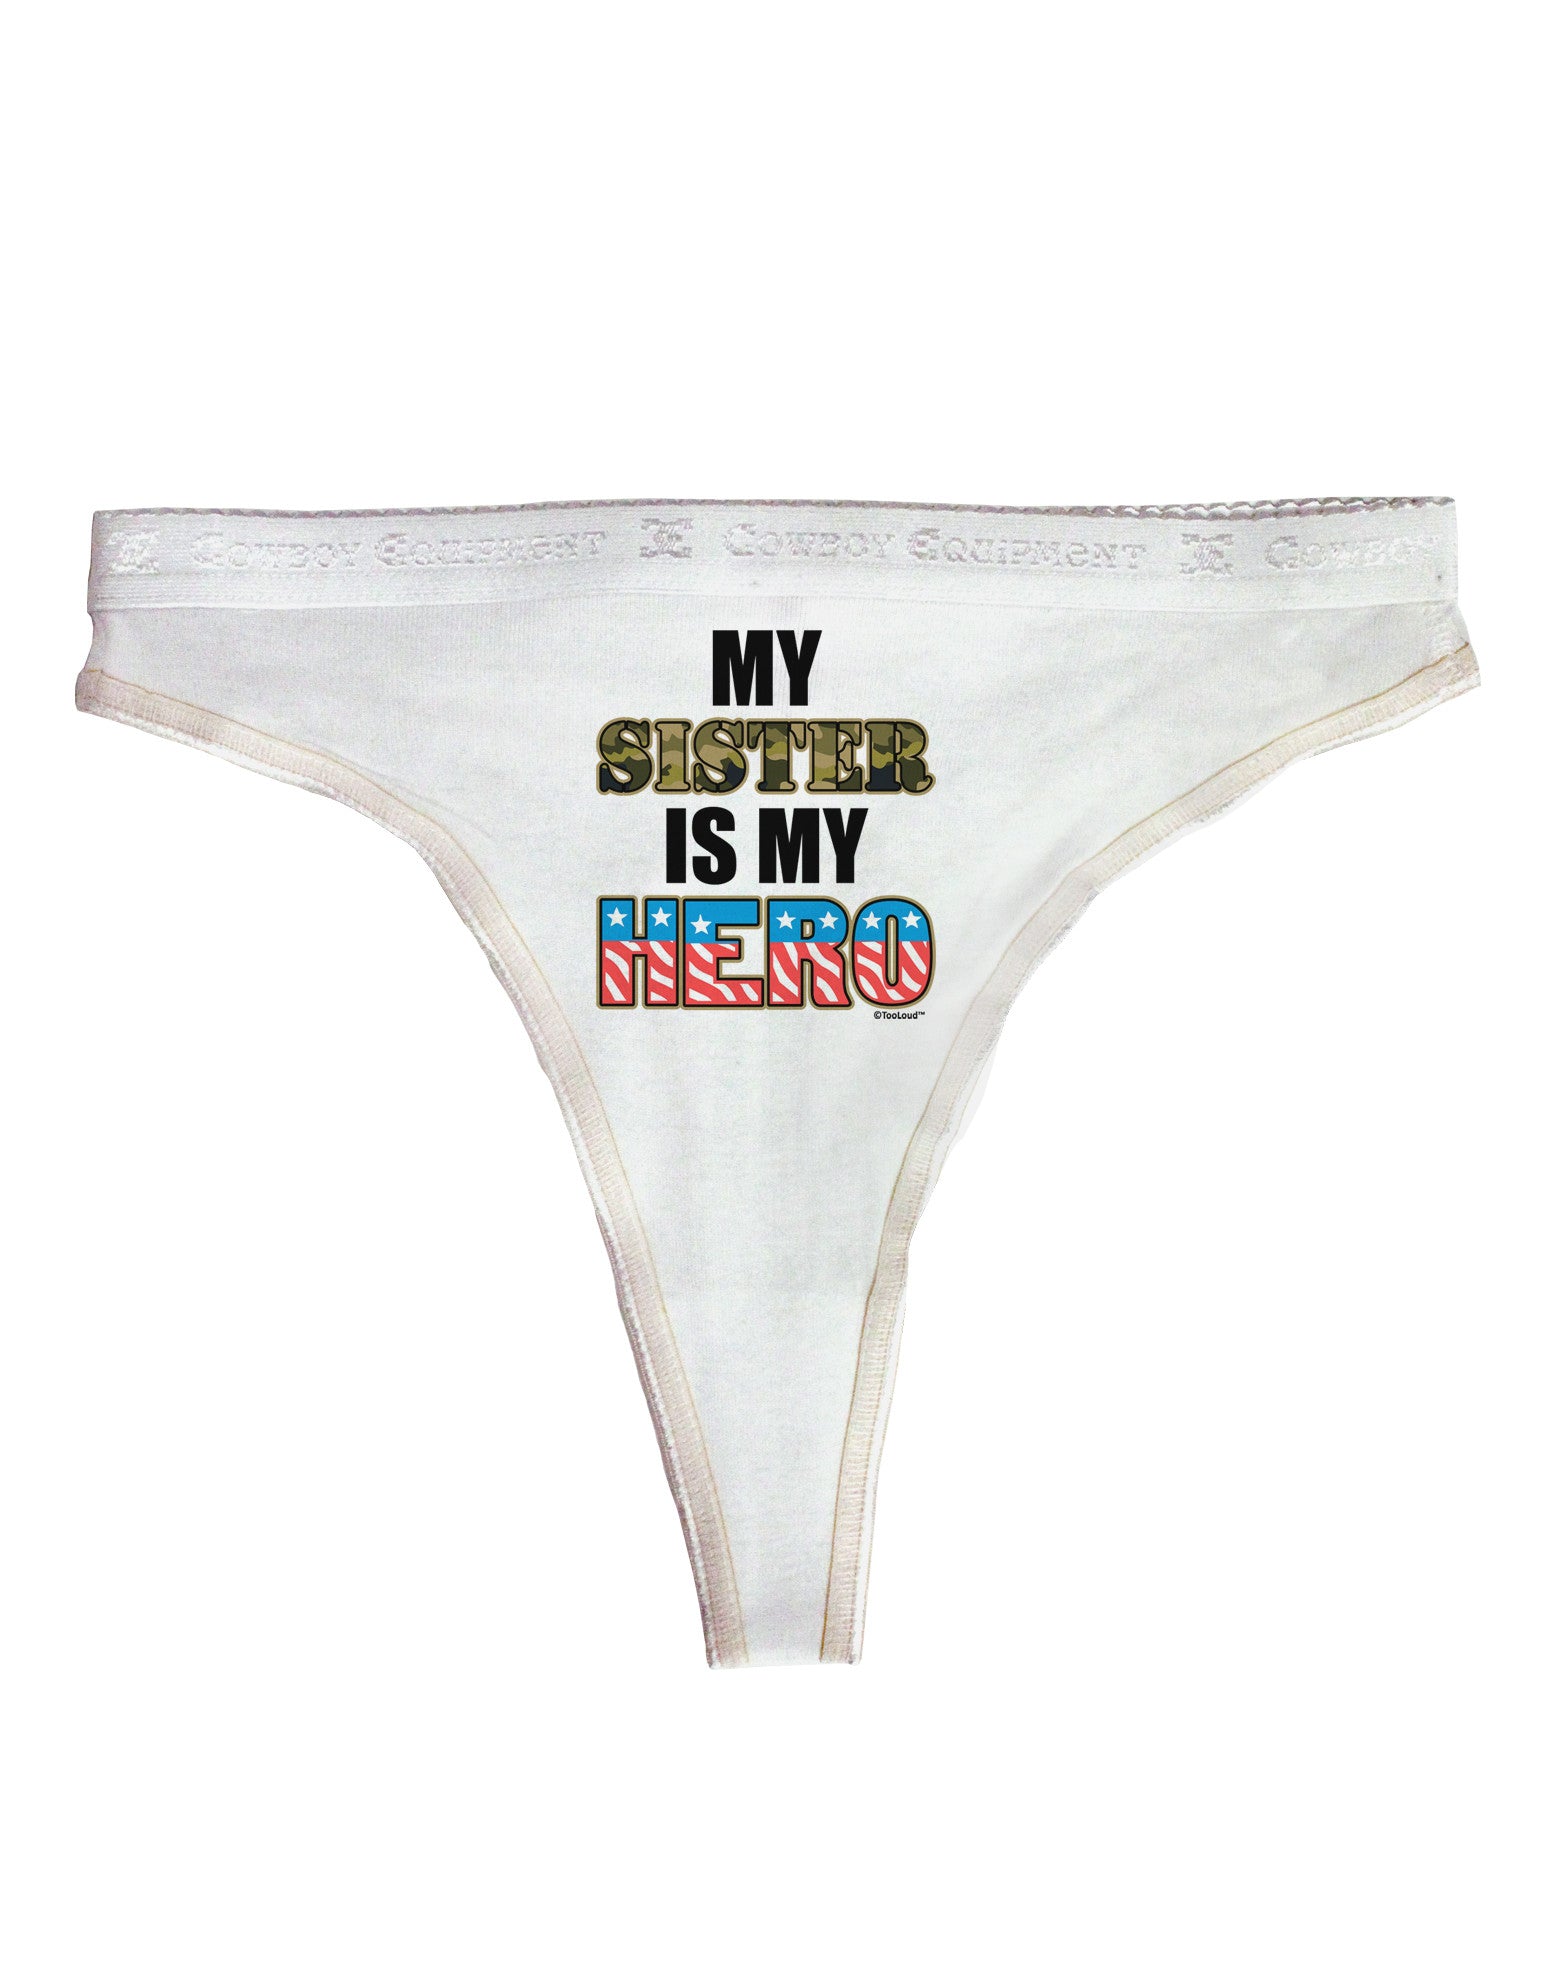 My Sister is My Hero - Armed Forces Womens Thong Underwear by TooLoud